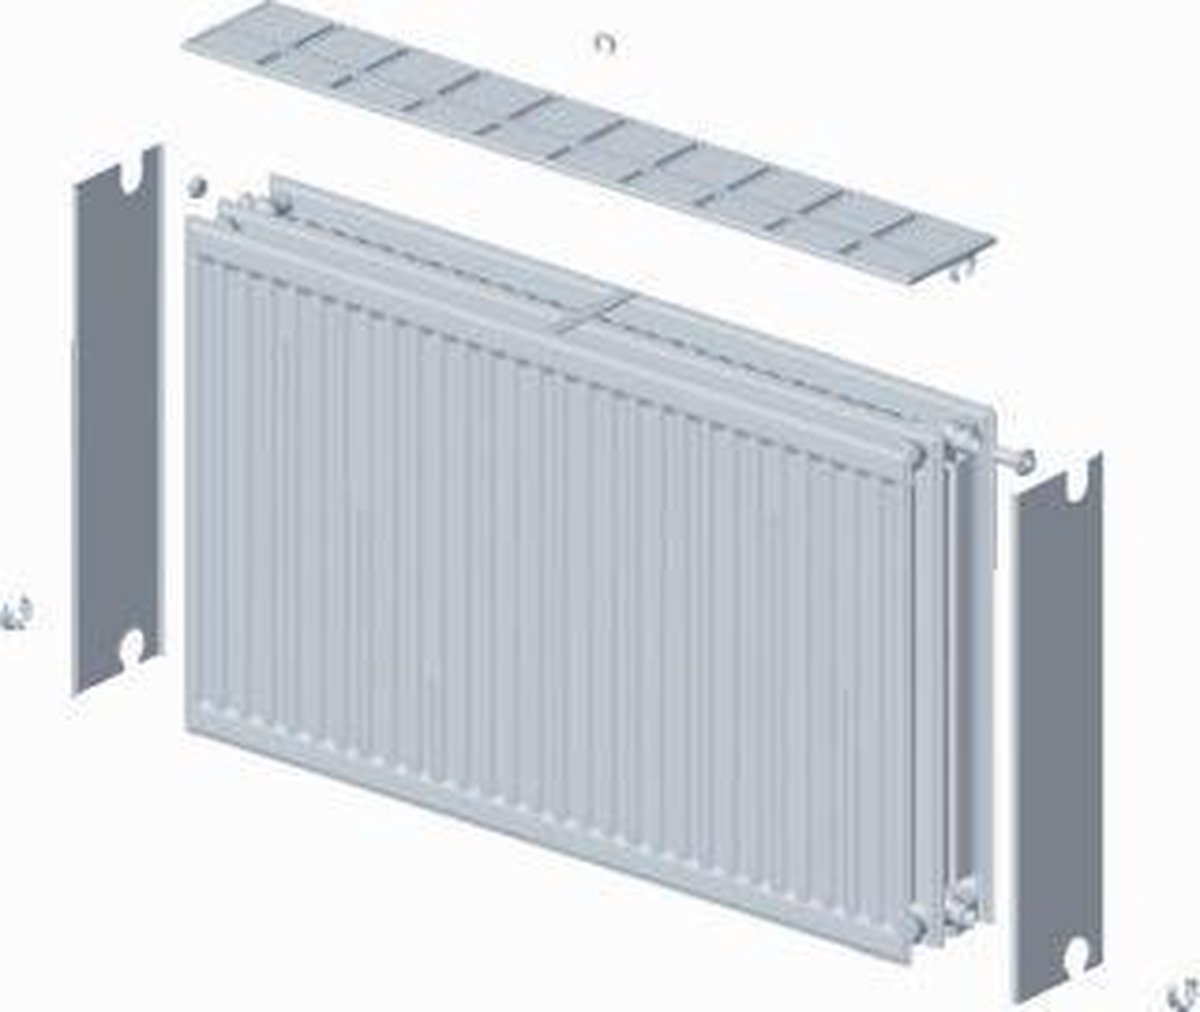 Stelrad paneelradiator Novello, staal, wit, (hxlxd) 900x900x158mm, 33